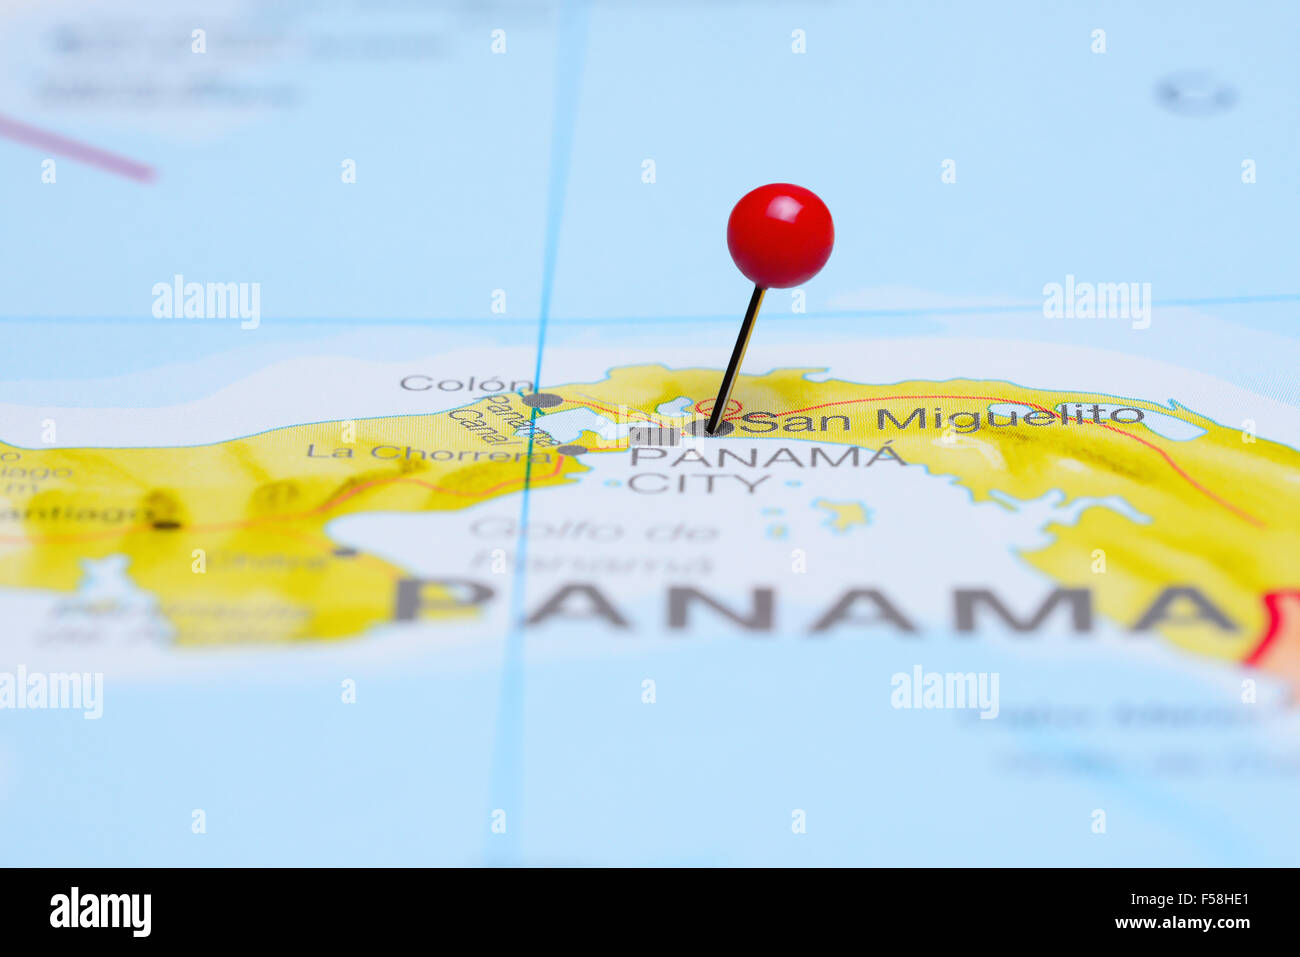 San Miguelito pinned on a map of America Stock Photo